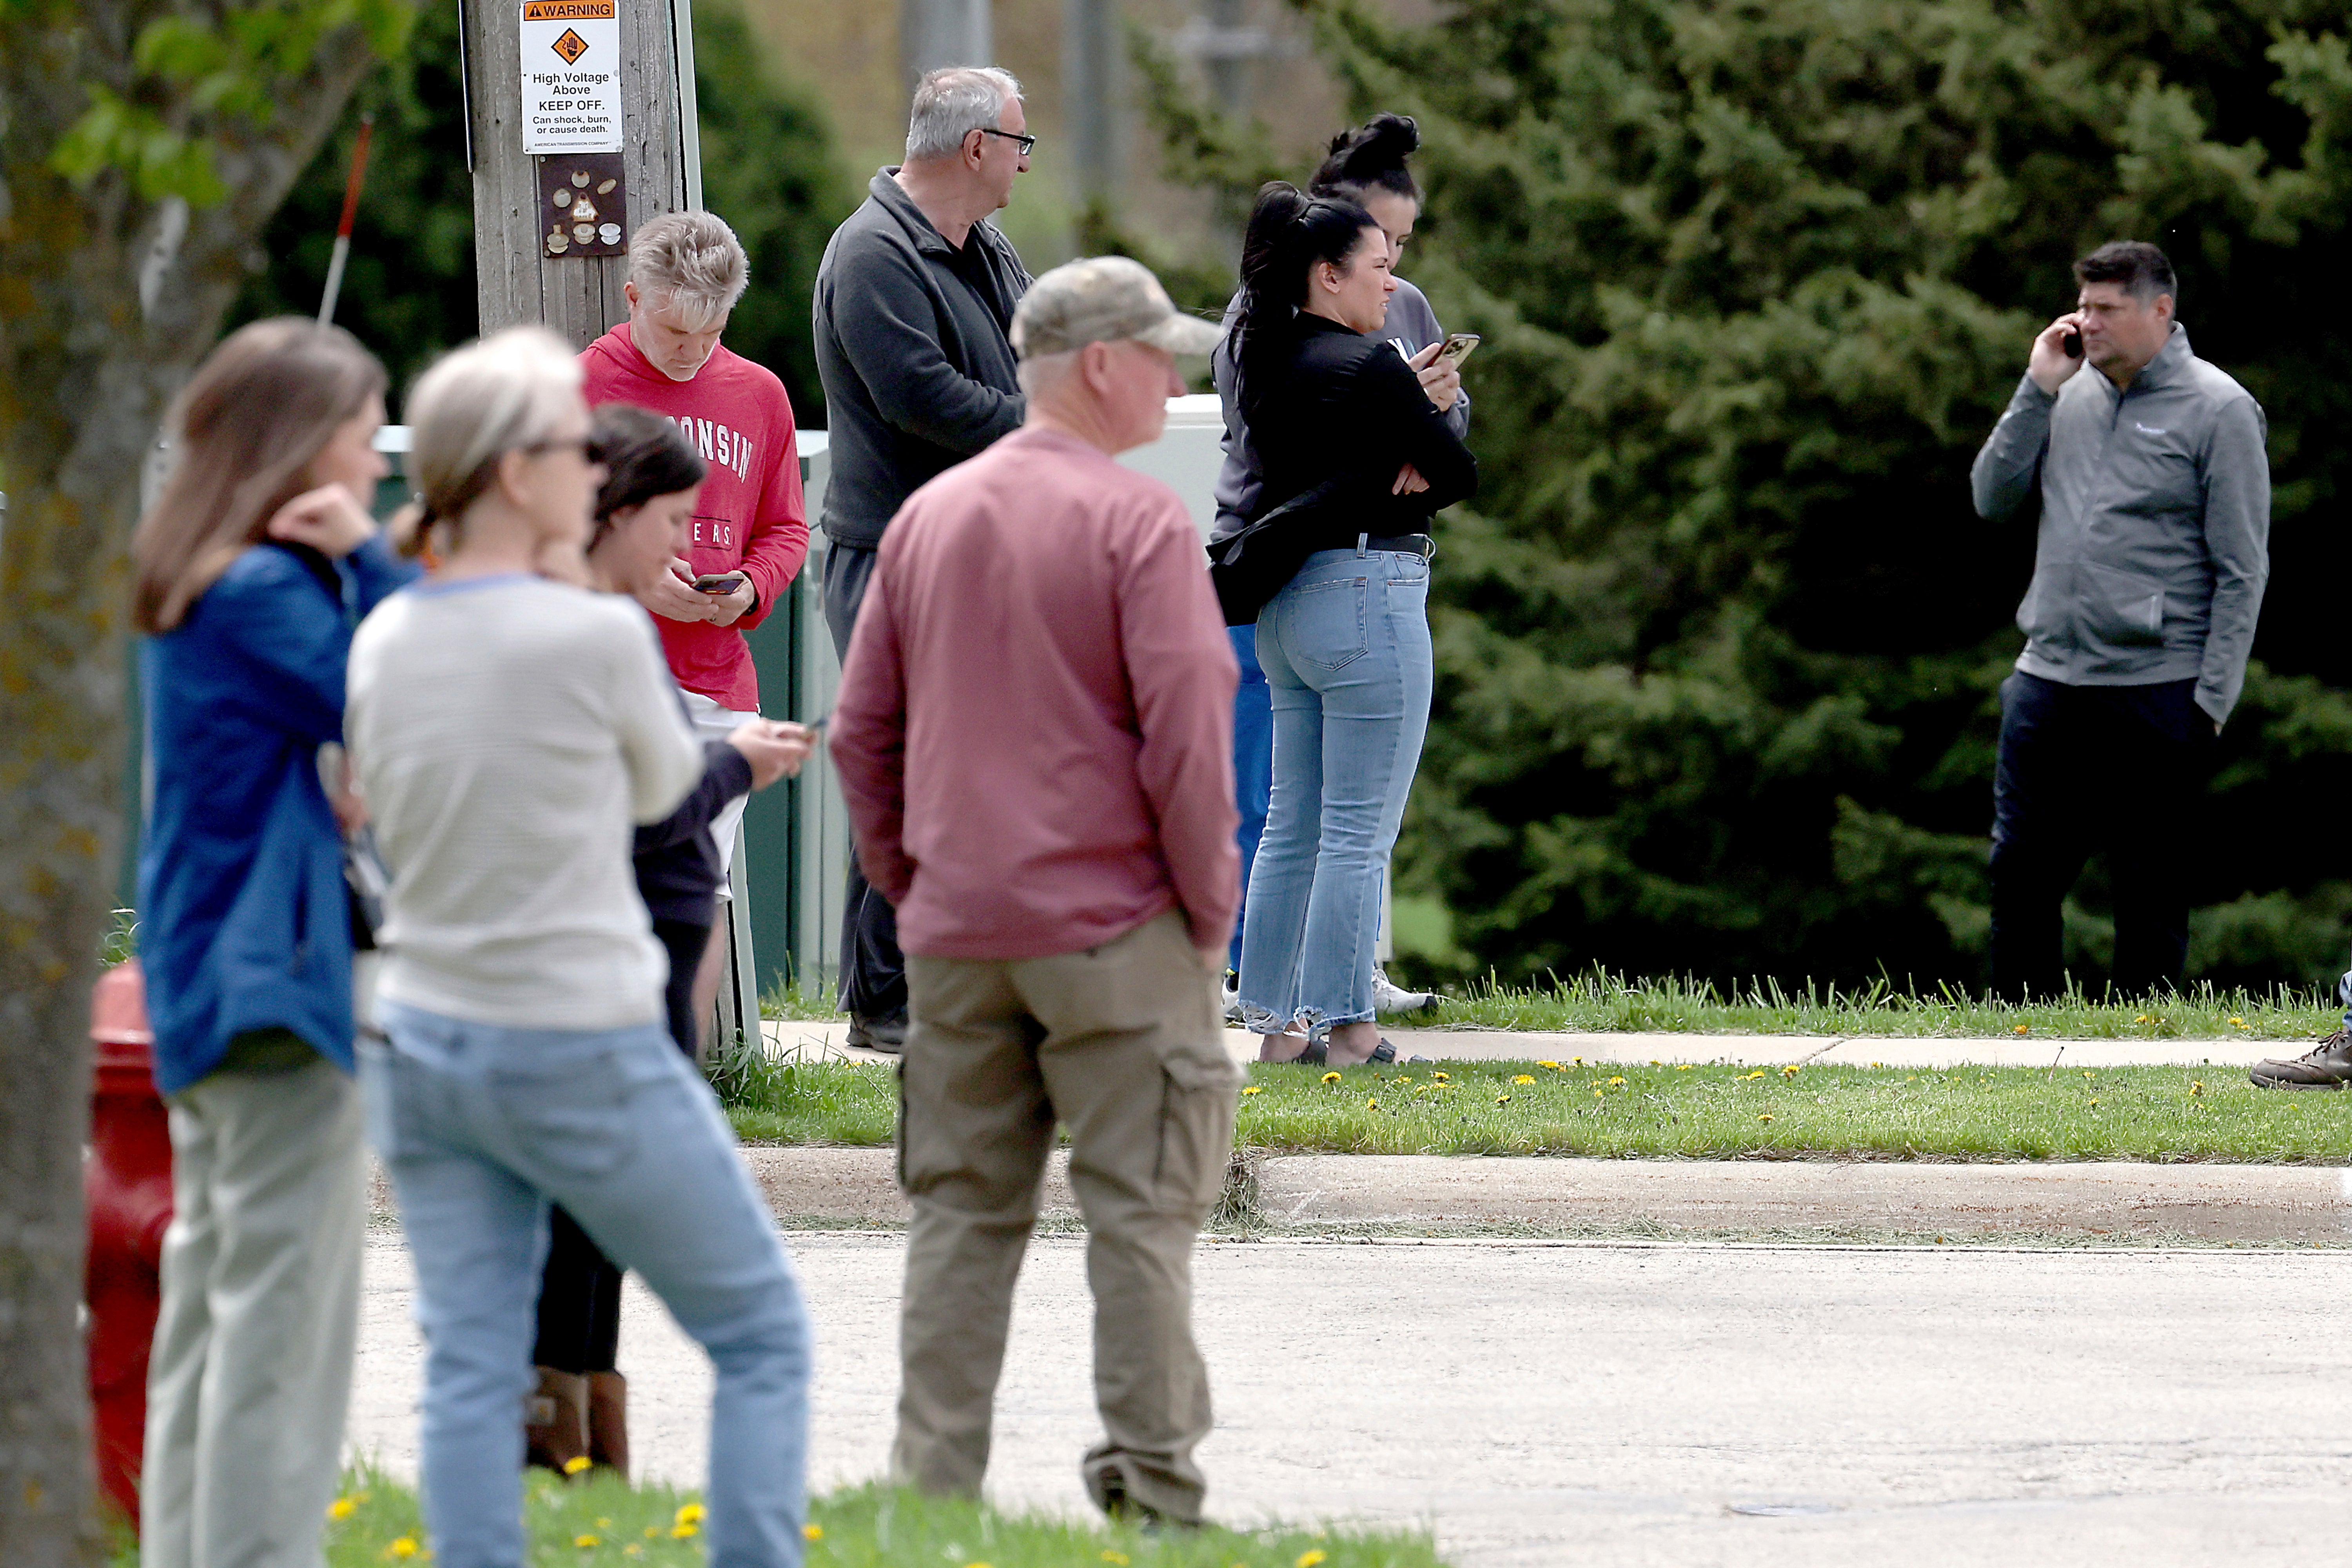 Family members wait as law enforcement personnel respond to the report of an active shooter at Mount Horeb Middle School in Mount Horeb, Wisconsin on Wednesday